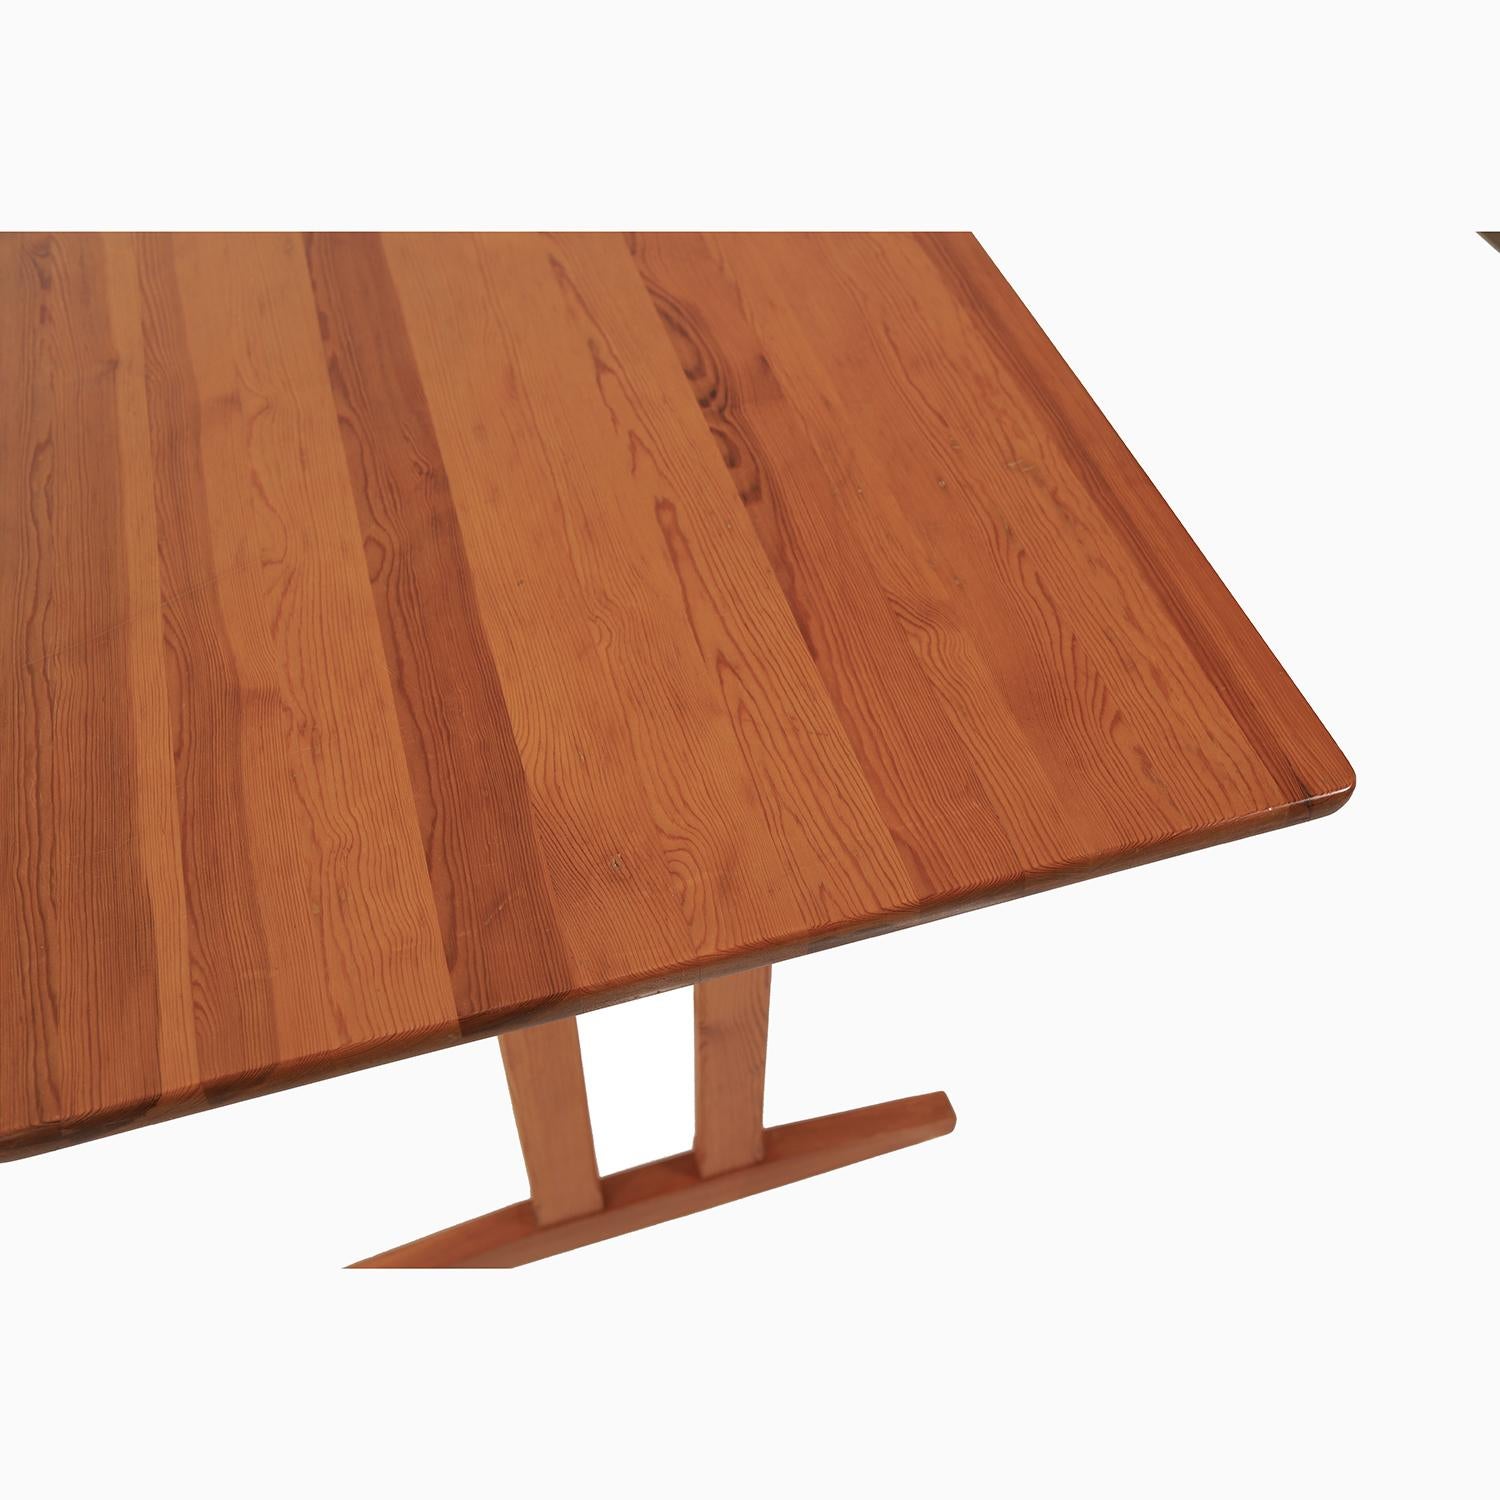 A minimal Swedish designed and made pine trestle table. A smaller scale table perfect for a smaller seating area or use as a writing desk. Solid wood top with shaker style trestle base. 

Professional, skilled furniture restoration is an integral